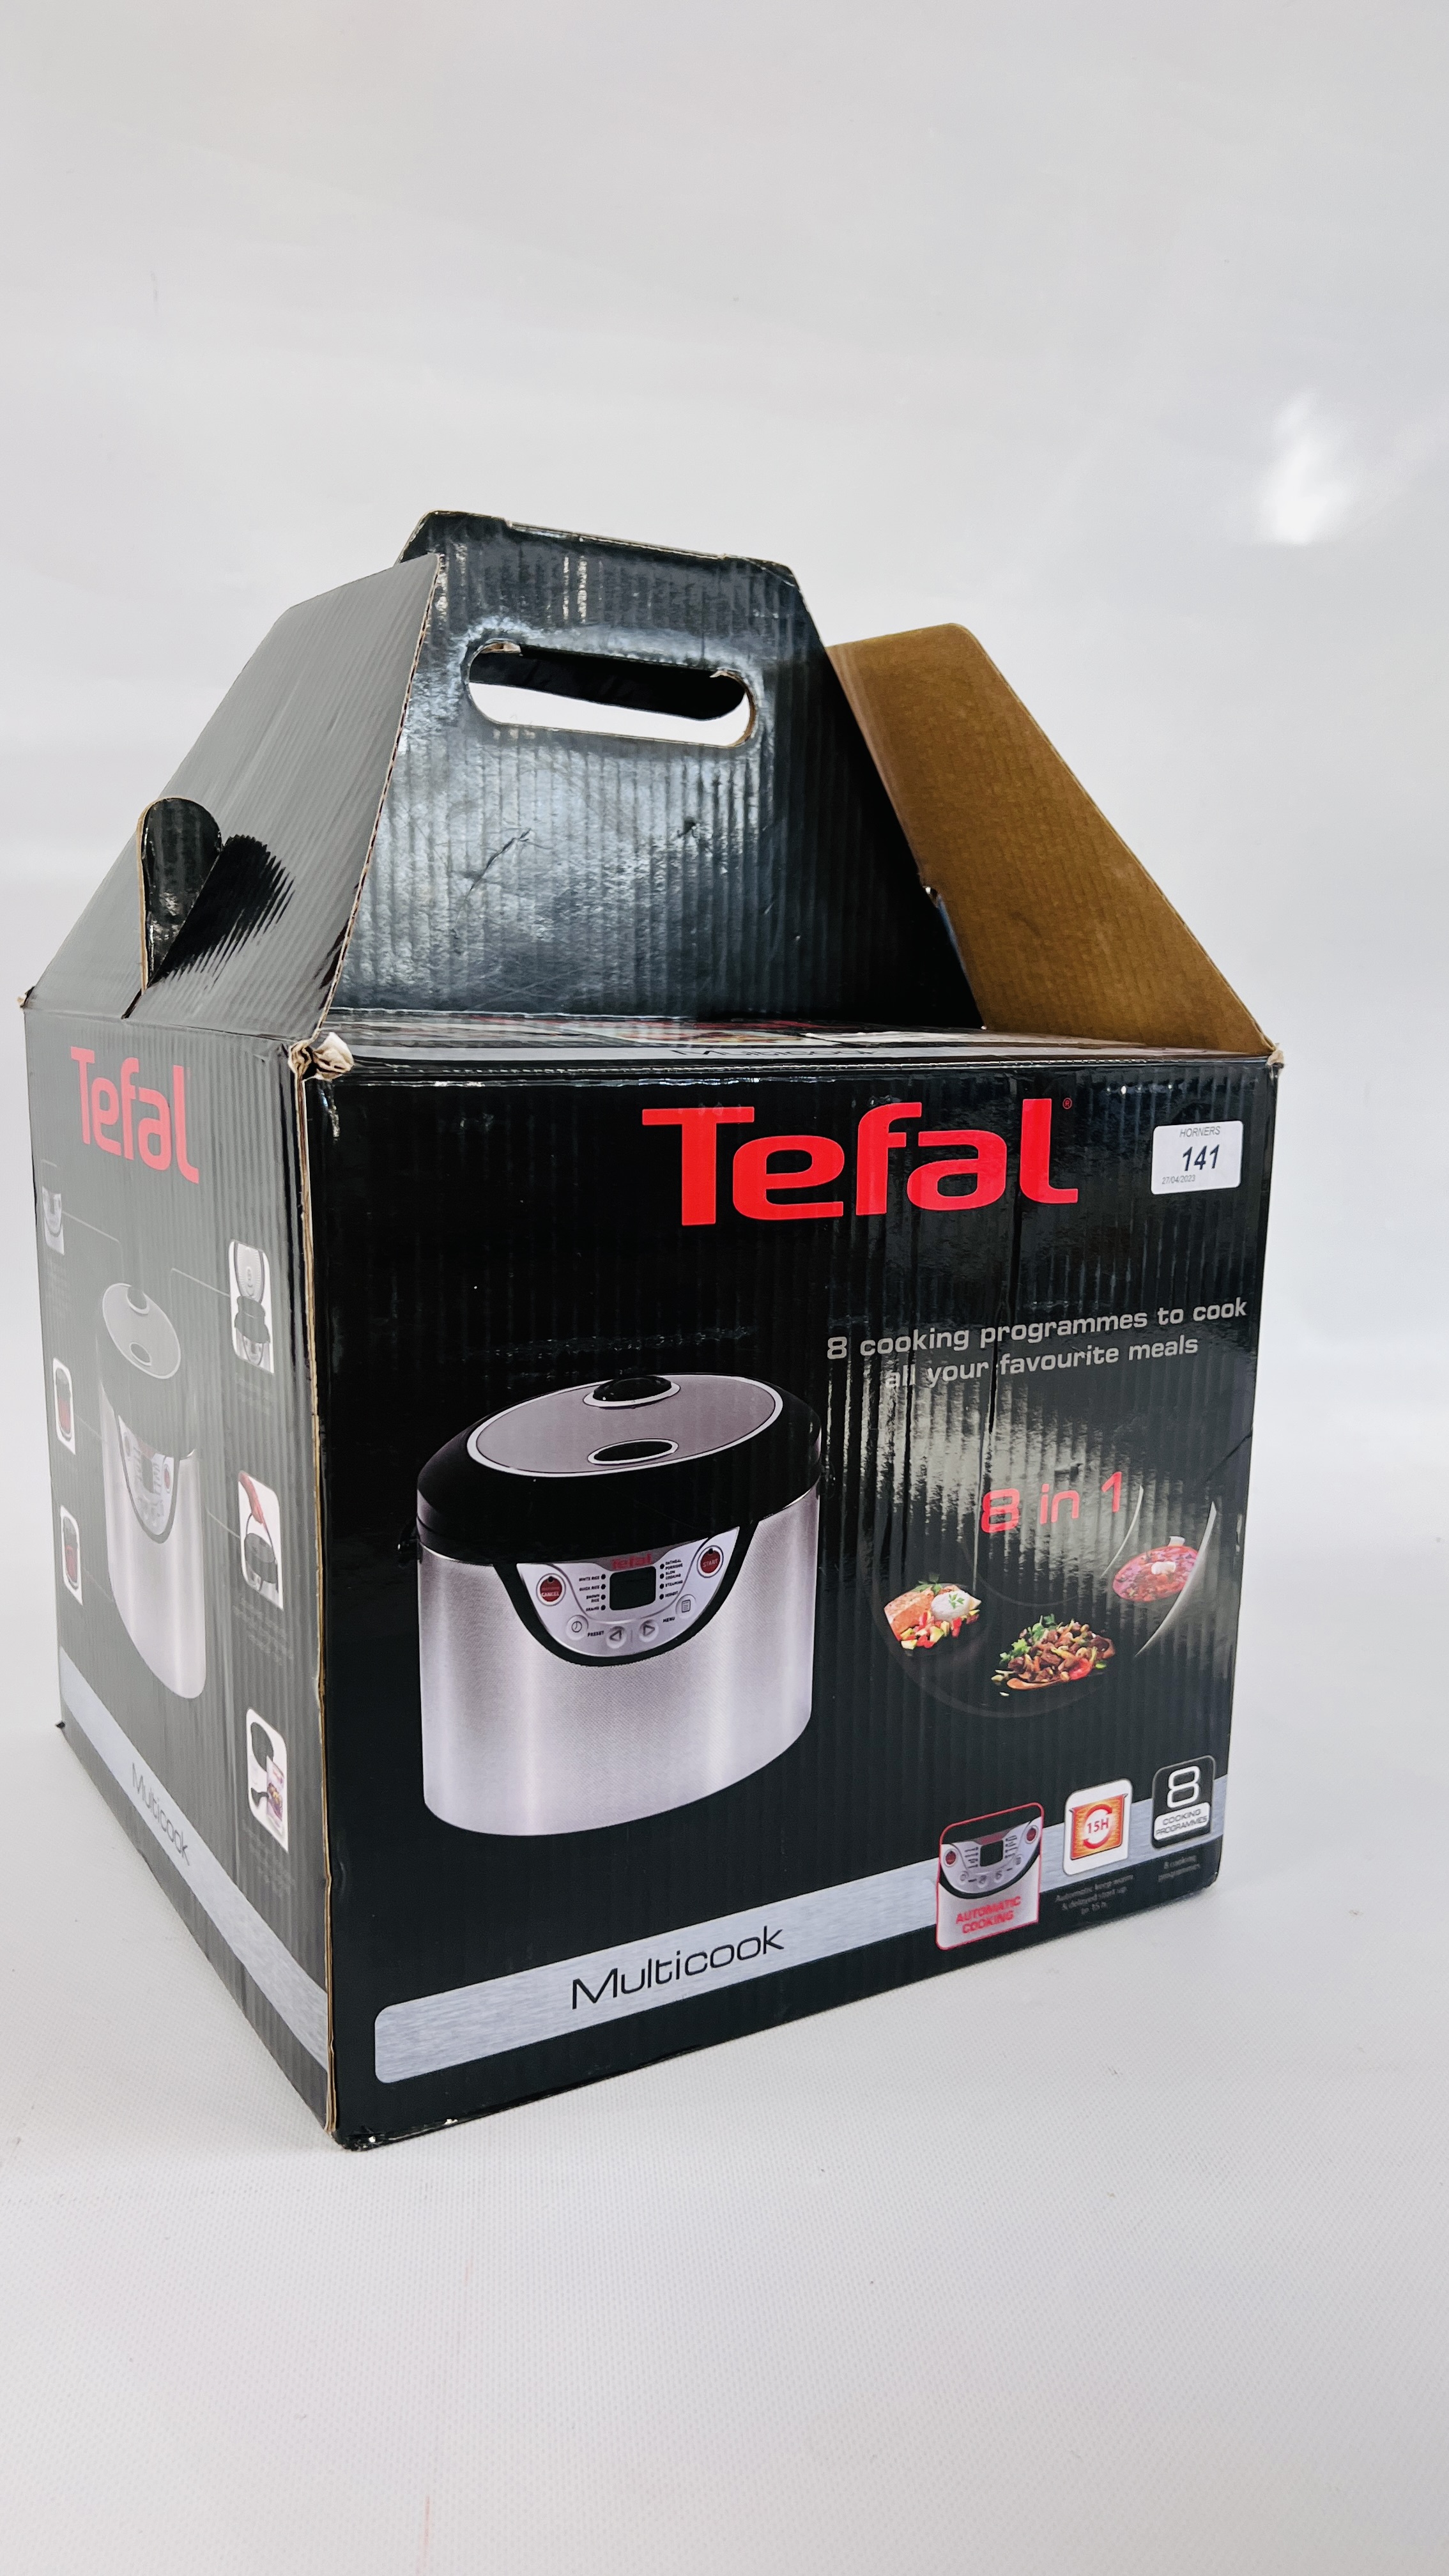 TEFAL MULTI COOK OVEN, BOXED UNUSED - SOLD AS SEEN.